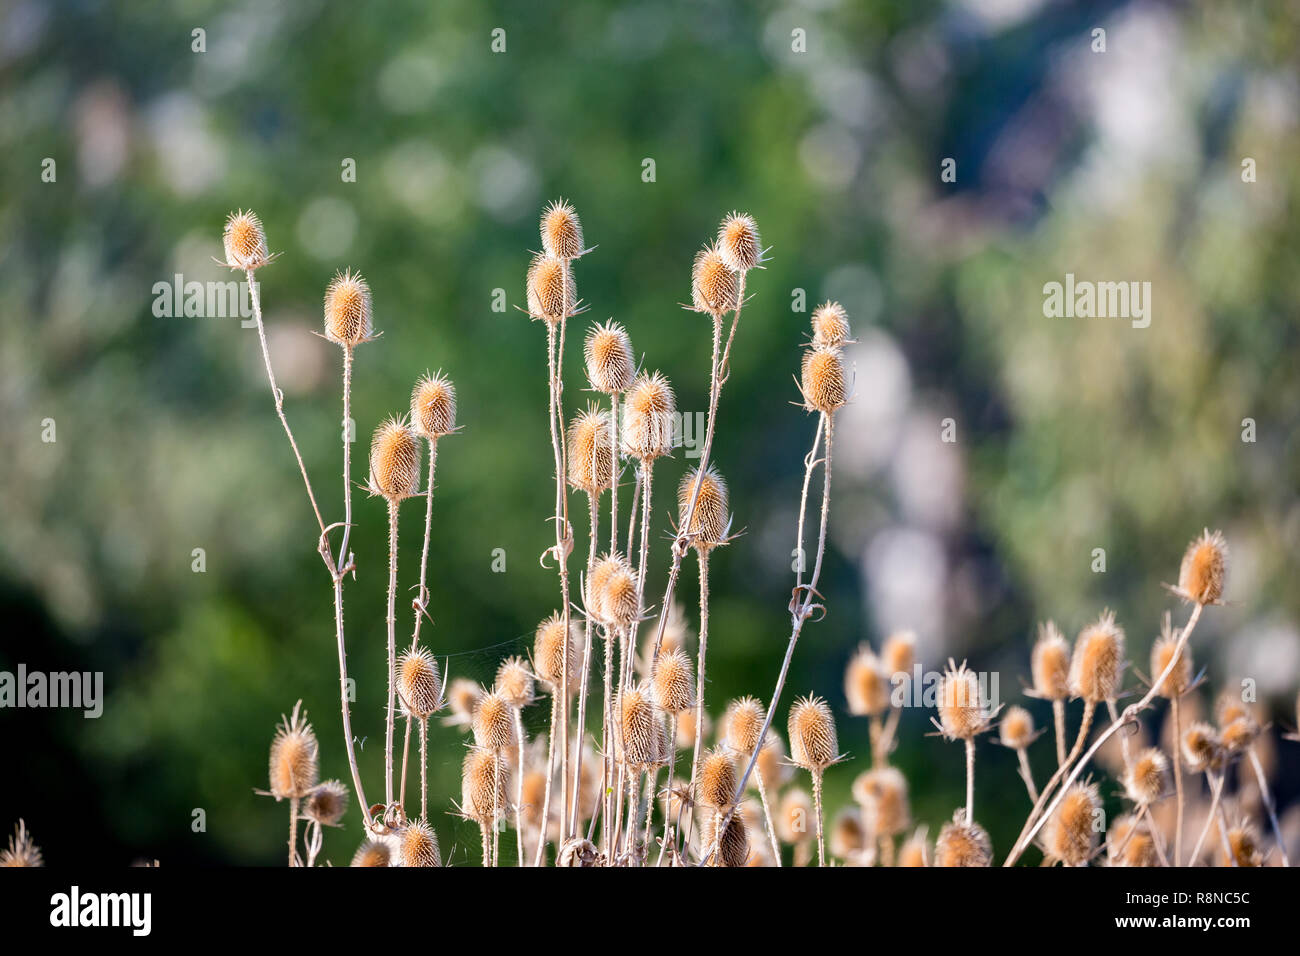 Selective shallow focus with blurred green background on several dry Wild Teasels heads, herb also known as Fuller's Teasel or Dipsacus Sylvestris. Su Stock Photo